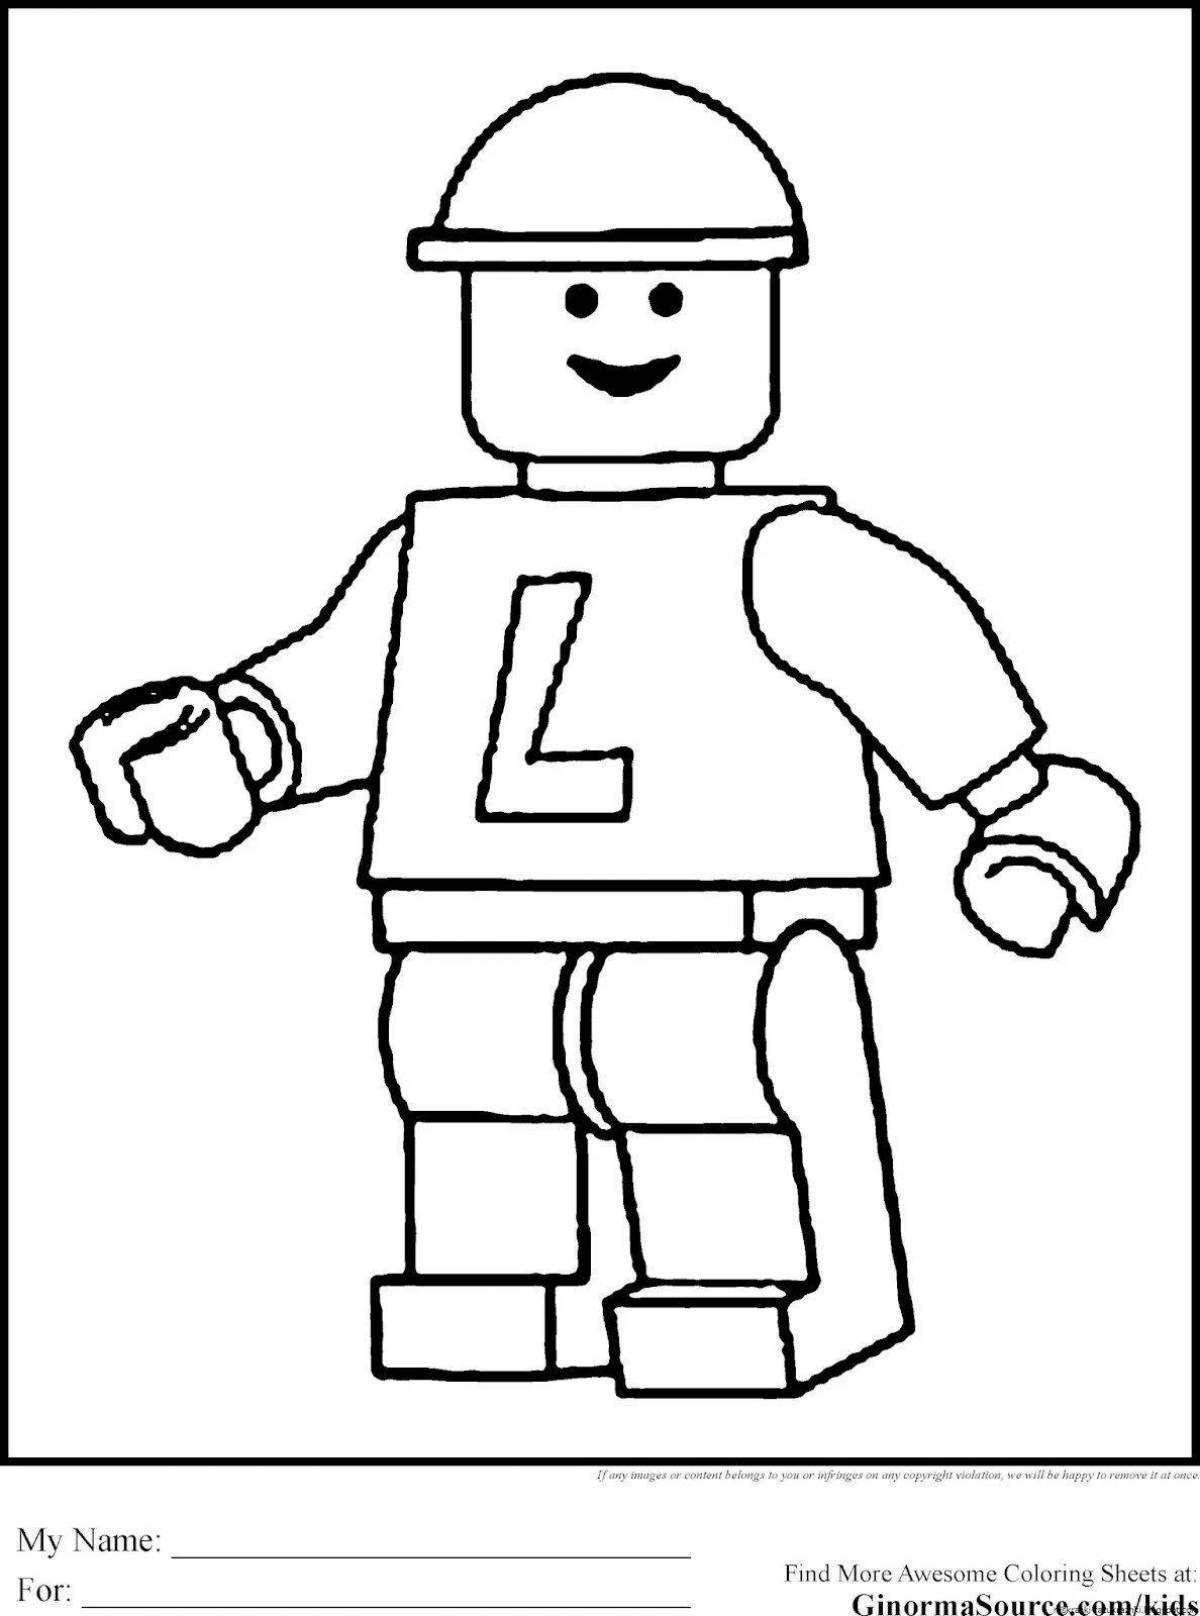 Intriguing coloring page with lego logo